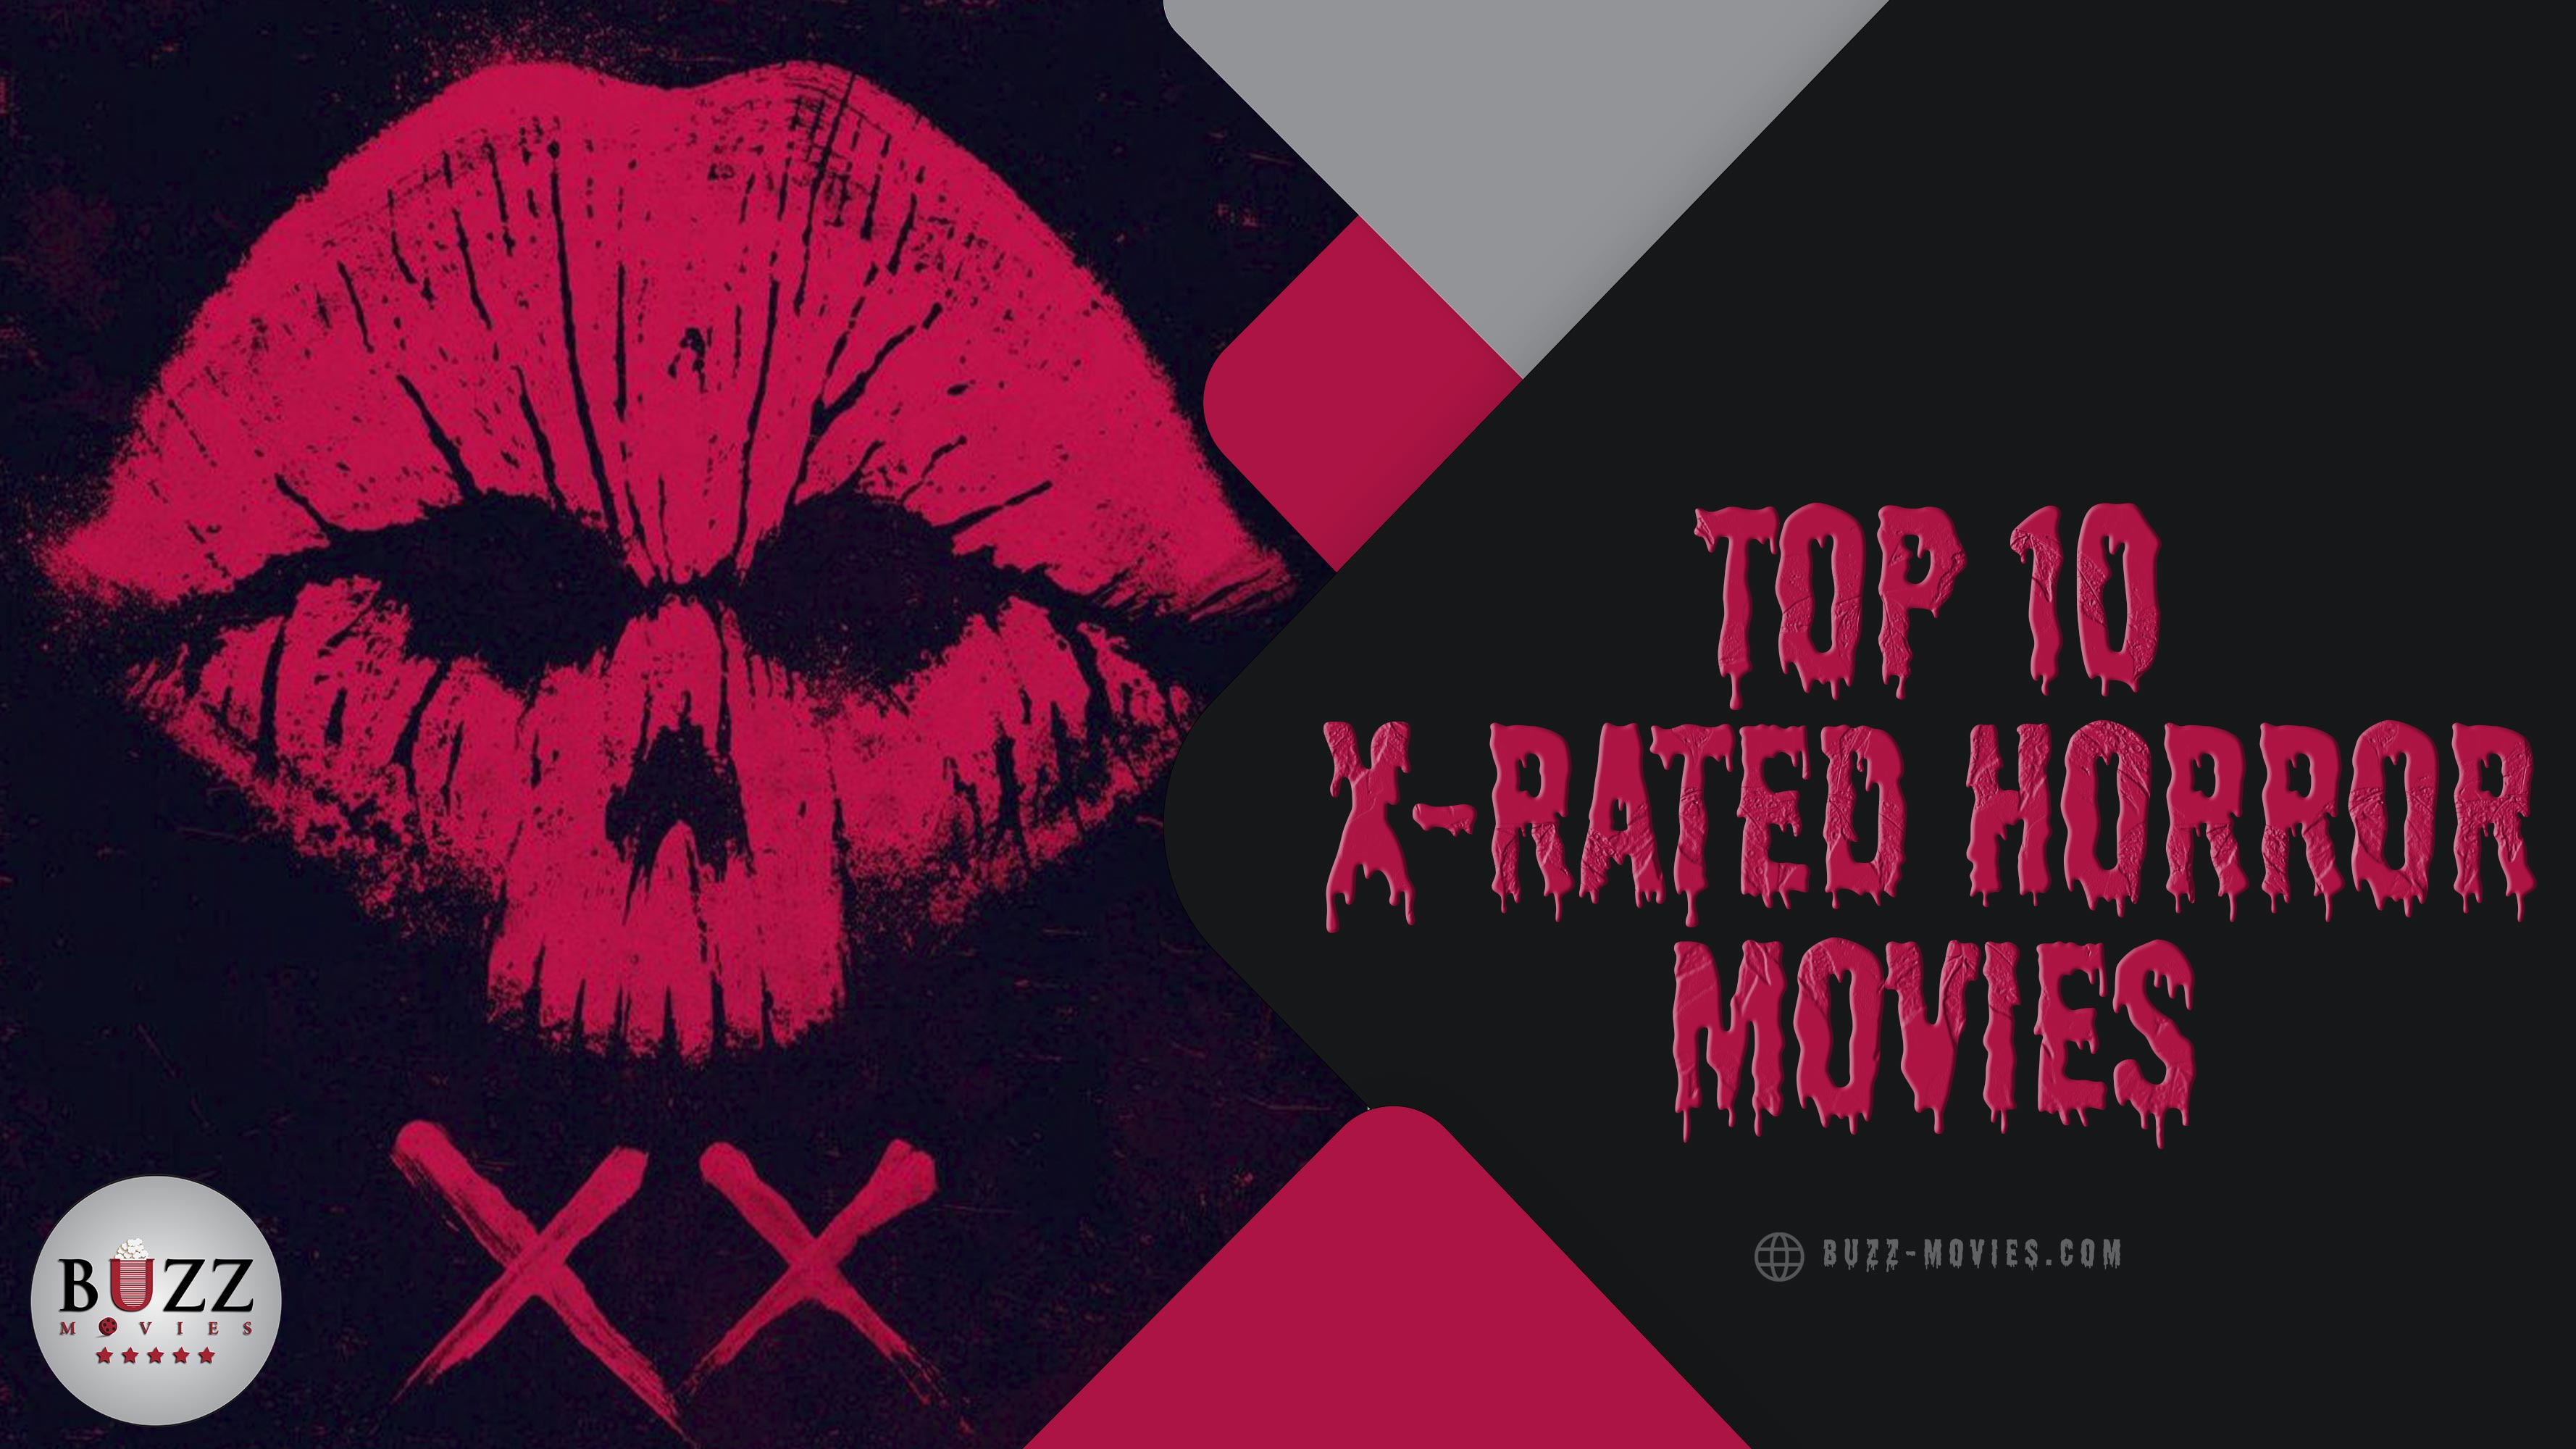 x rated horror films